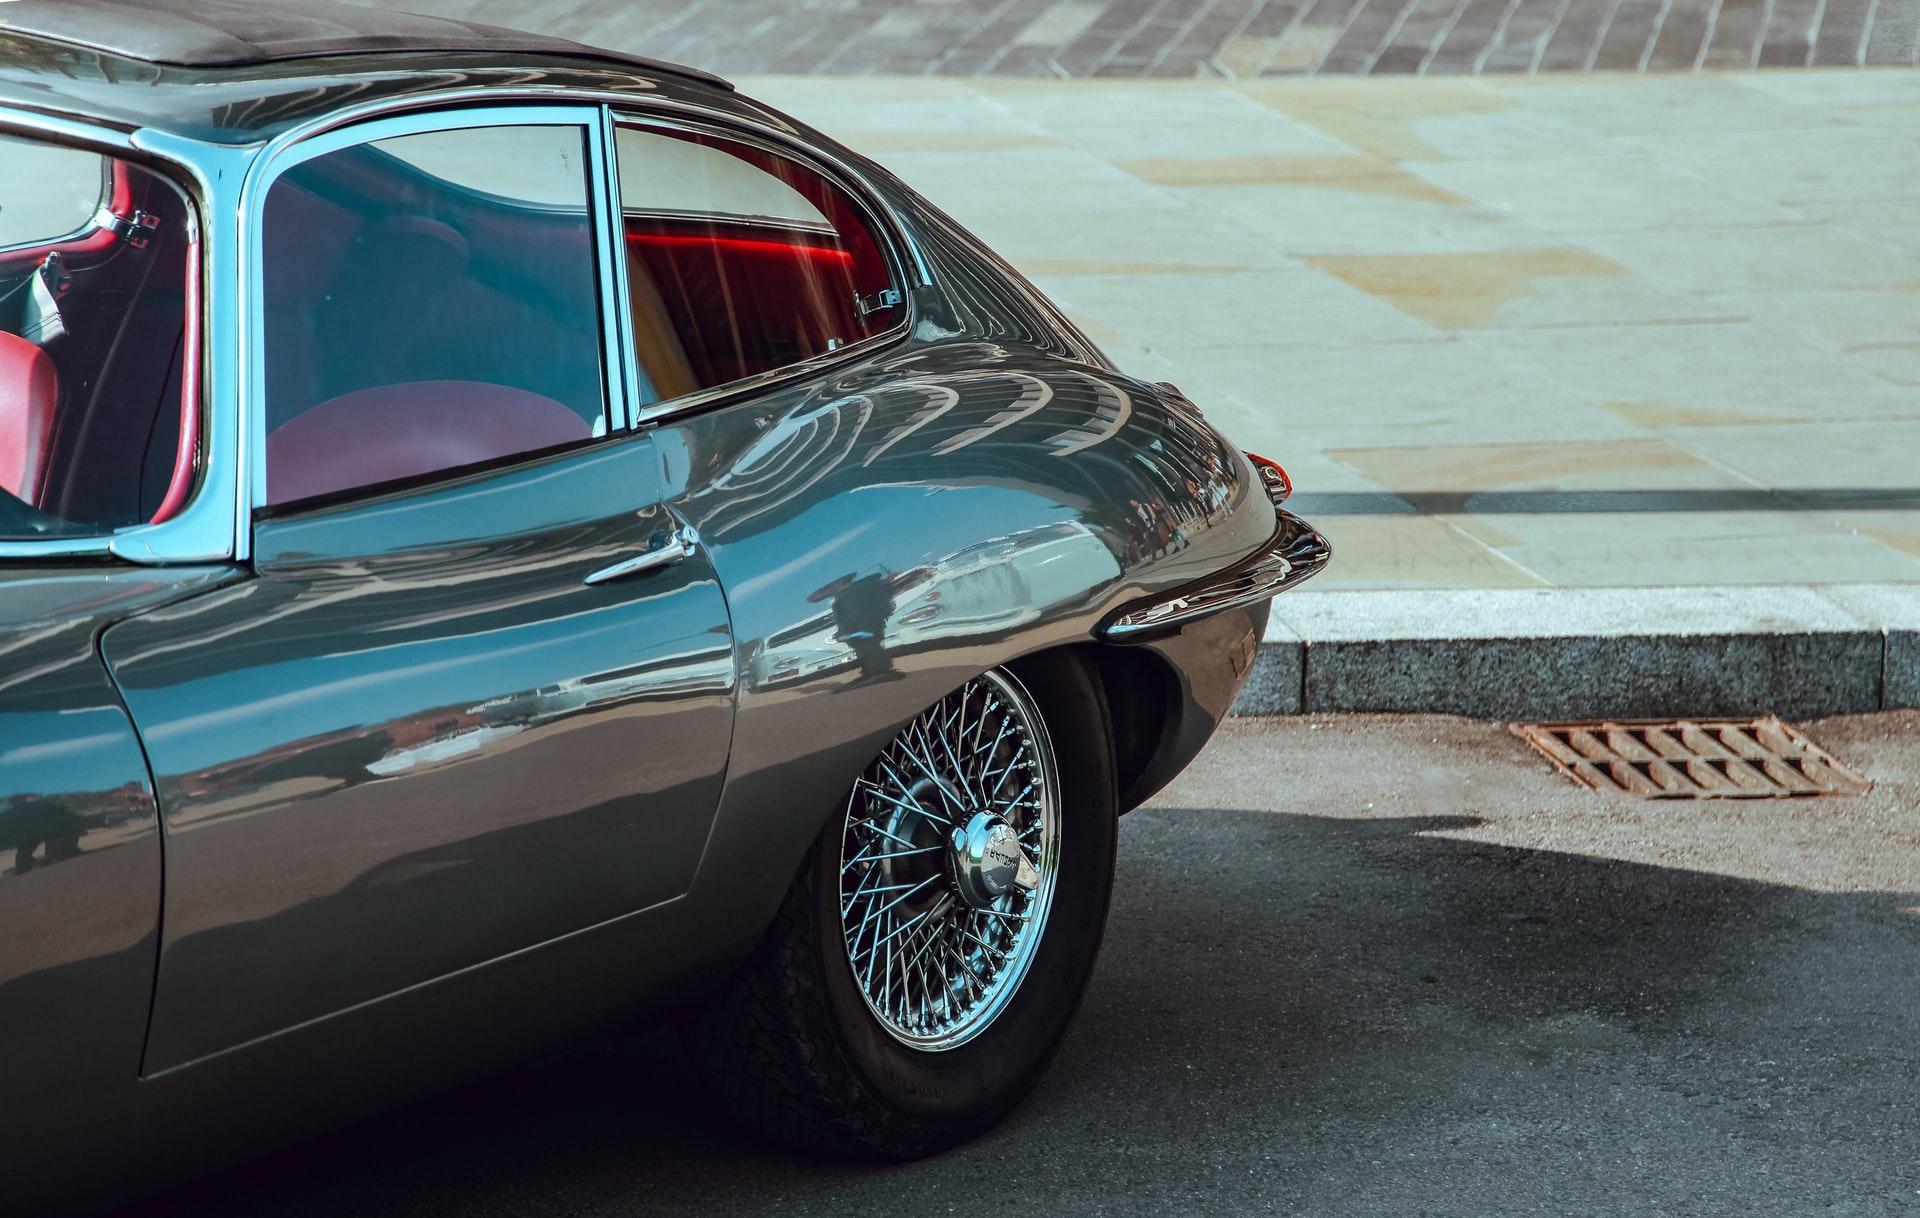 If you are into vintage Jags, you’re sure to recognize some of these legends.